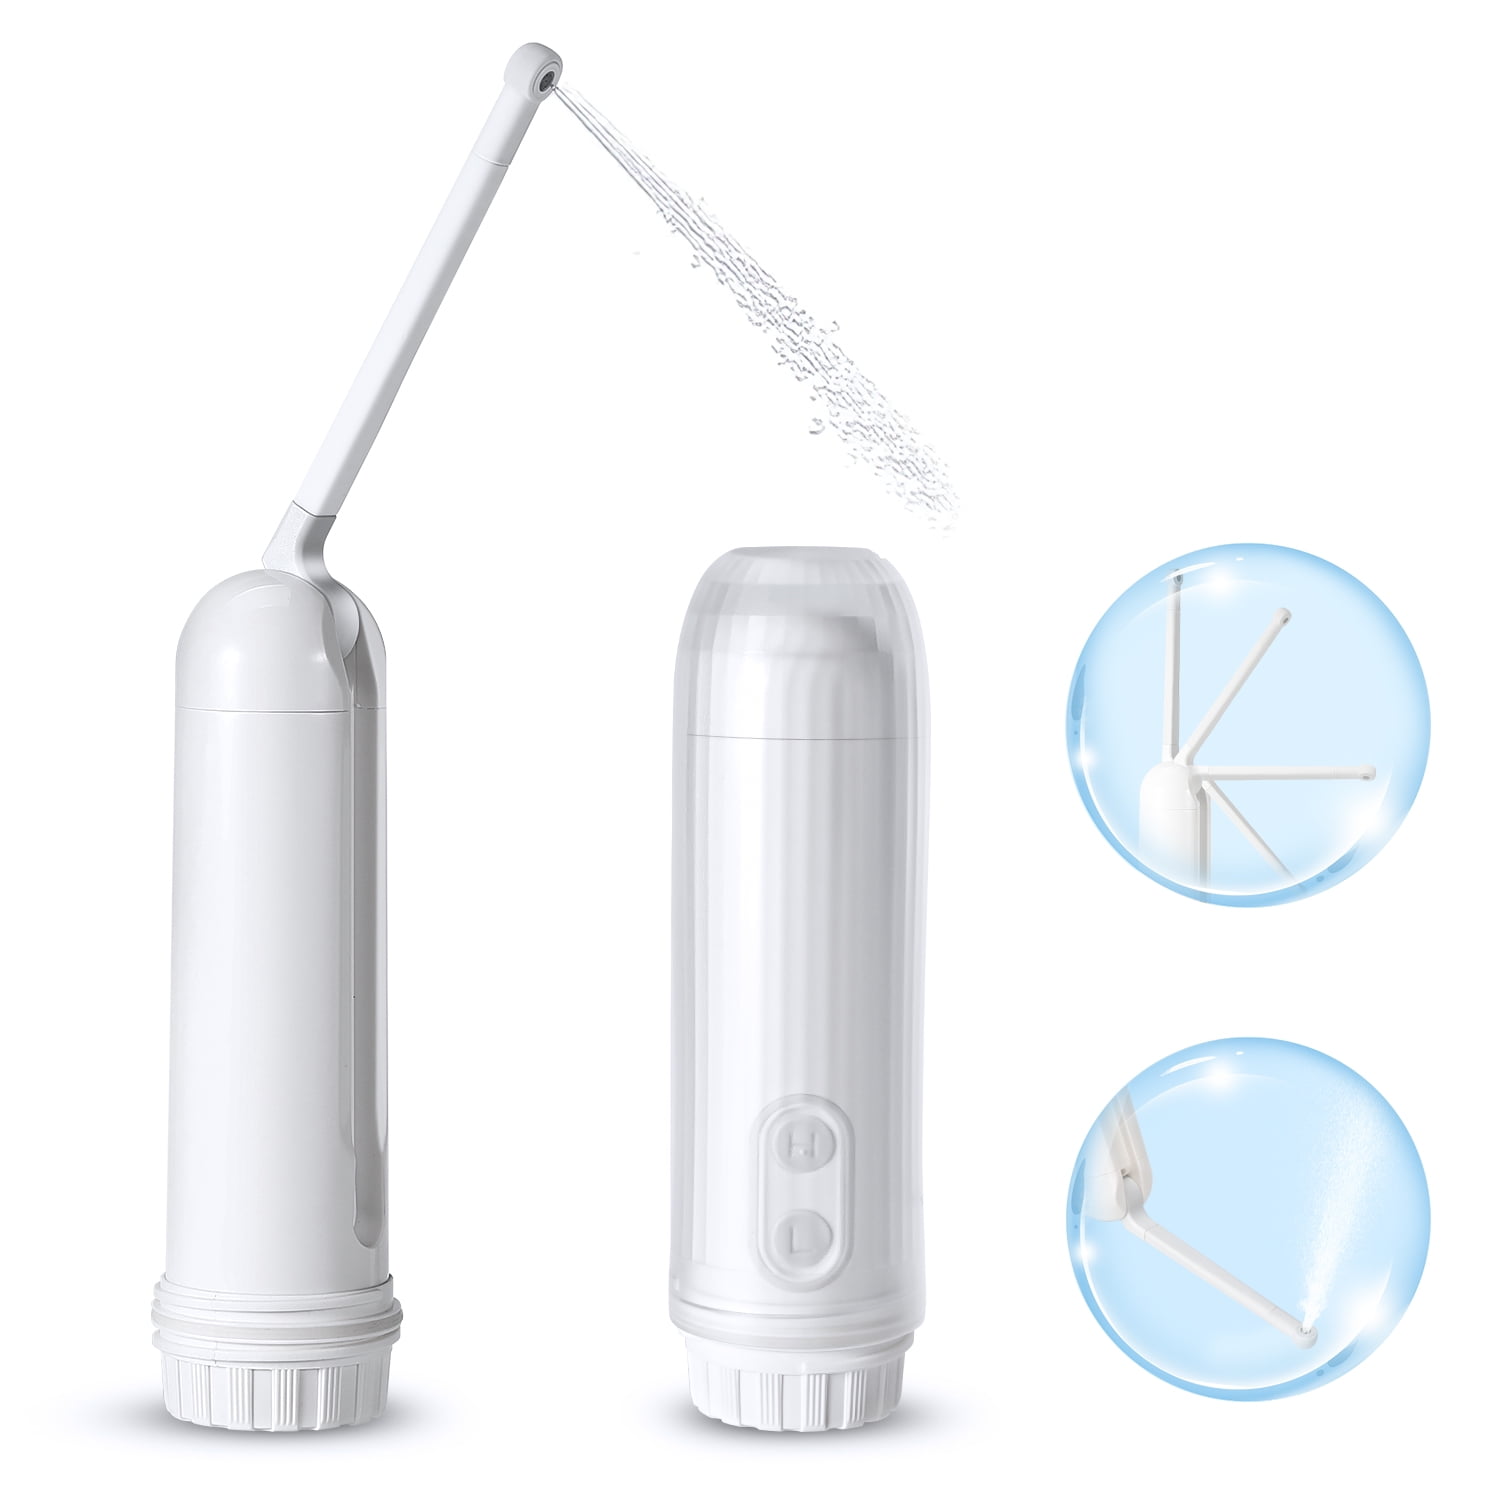 Portable Travel Bidet Sprayer Handheld Electric Personal Mini Bidet Bottle  for Outdoor Traveling/Soothing Postpartum Care/Baby Care 